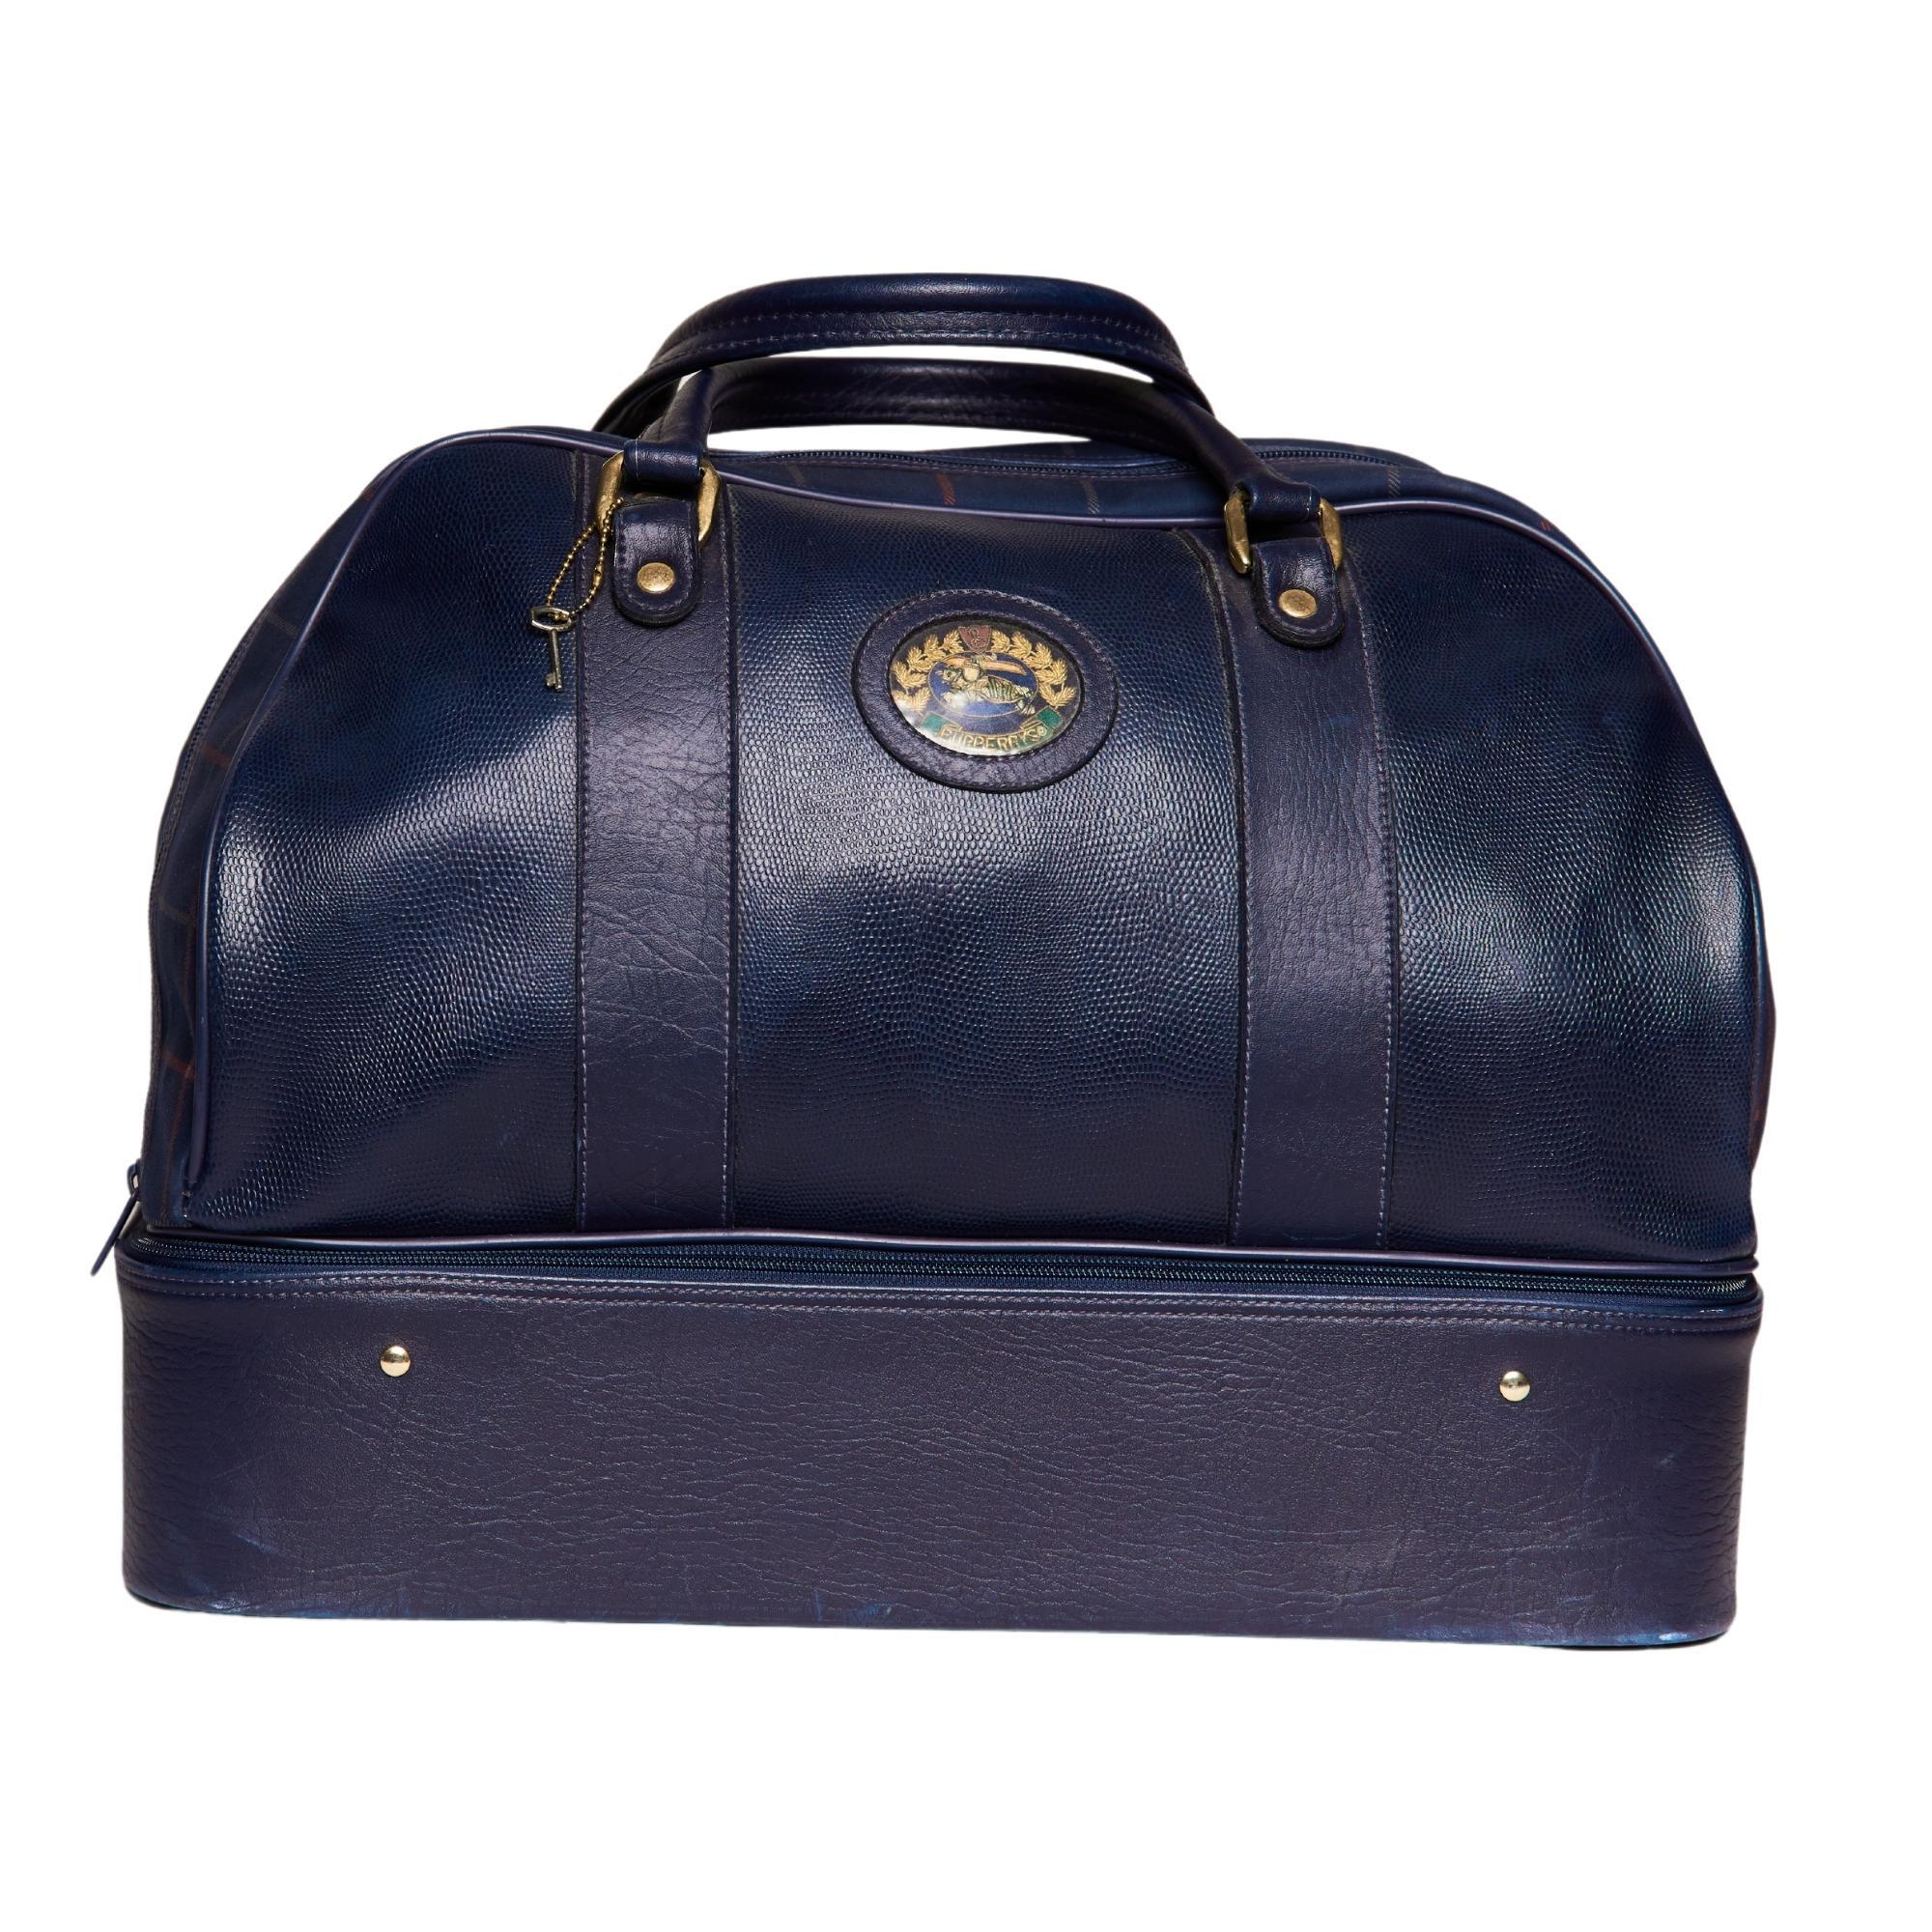 COLOR: Navy
MATERIAL: Leather and cloth
MEASURES: H 15” x L 20” x D 11”
DROP: 7”
COMES WITH: Attached lock onside and key
CONDITION: Good - scratches to leather throughout, rub marks scuffing to corners, faint scratches to hardware, and small scuffs